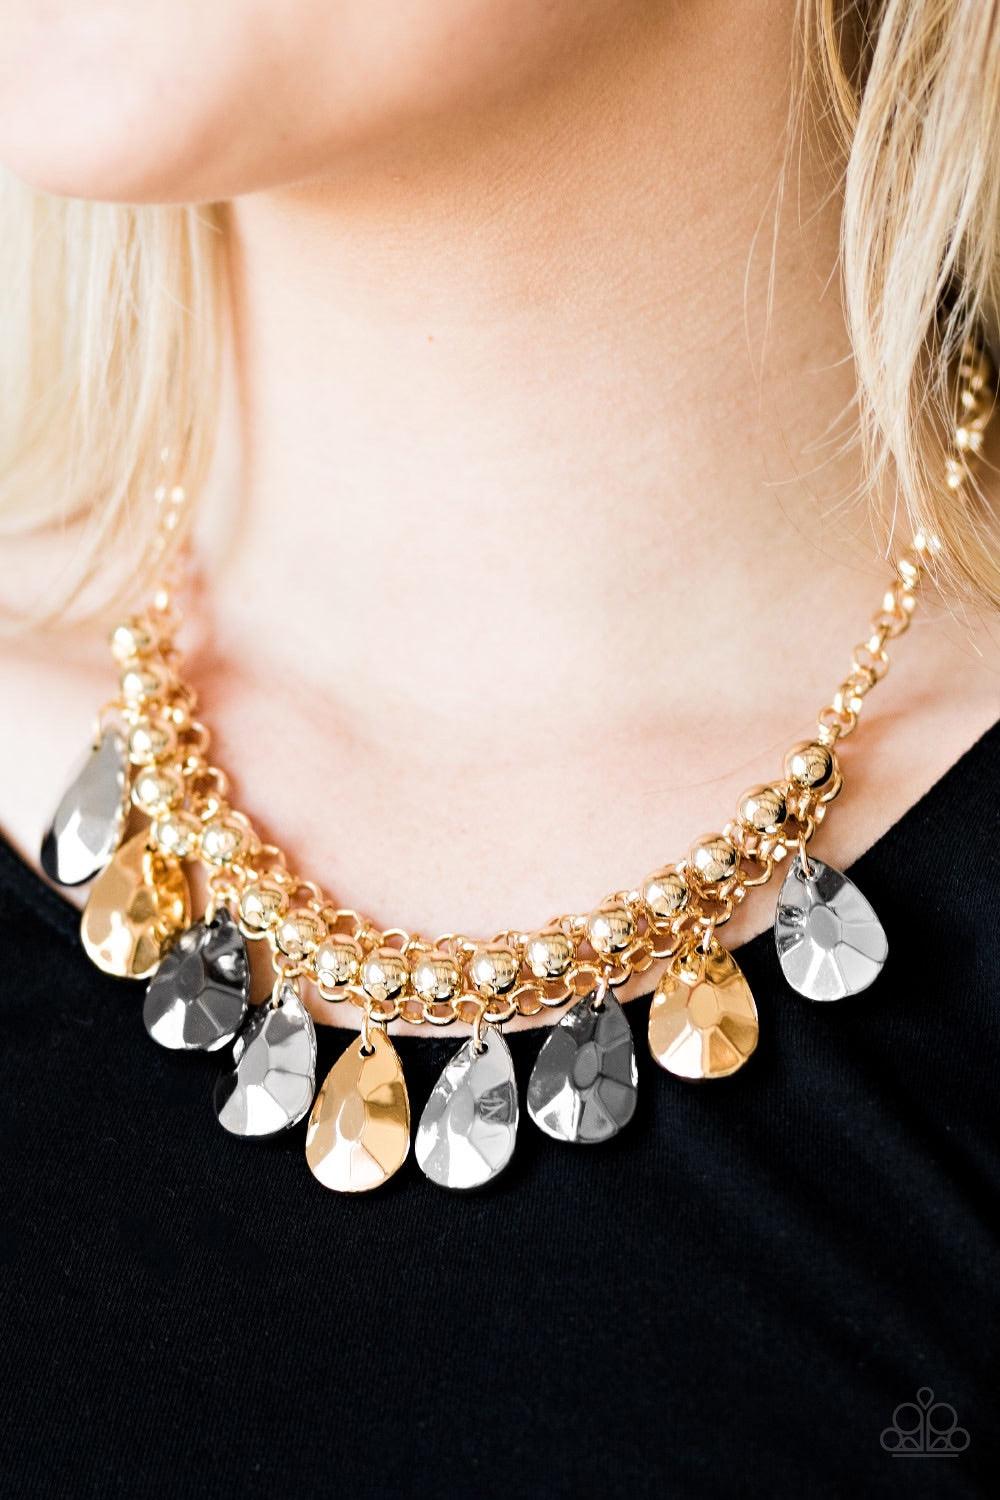 Paparazzi Accessories La DIVA Loca - Multi Faceted silver, gold, and gunmetal teardrops trickle from the bottom of interwoven gold chains, creating a dramatic fringe below the collar. Classic gold beads swing from the bold chains, adding a timelessly chic